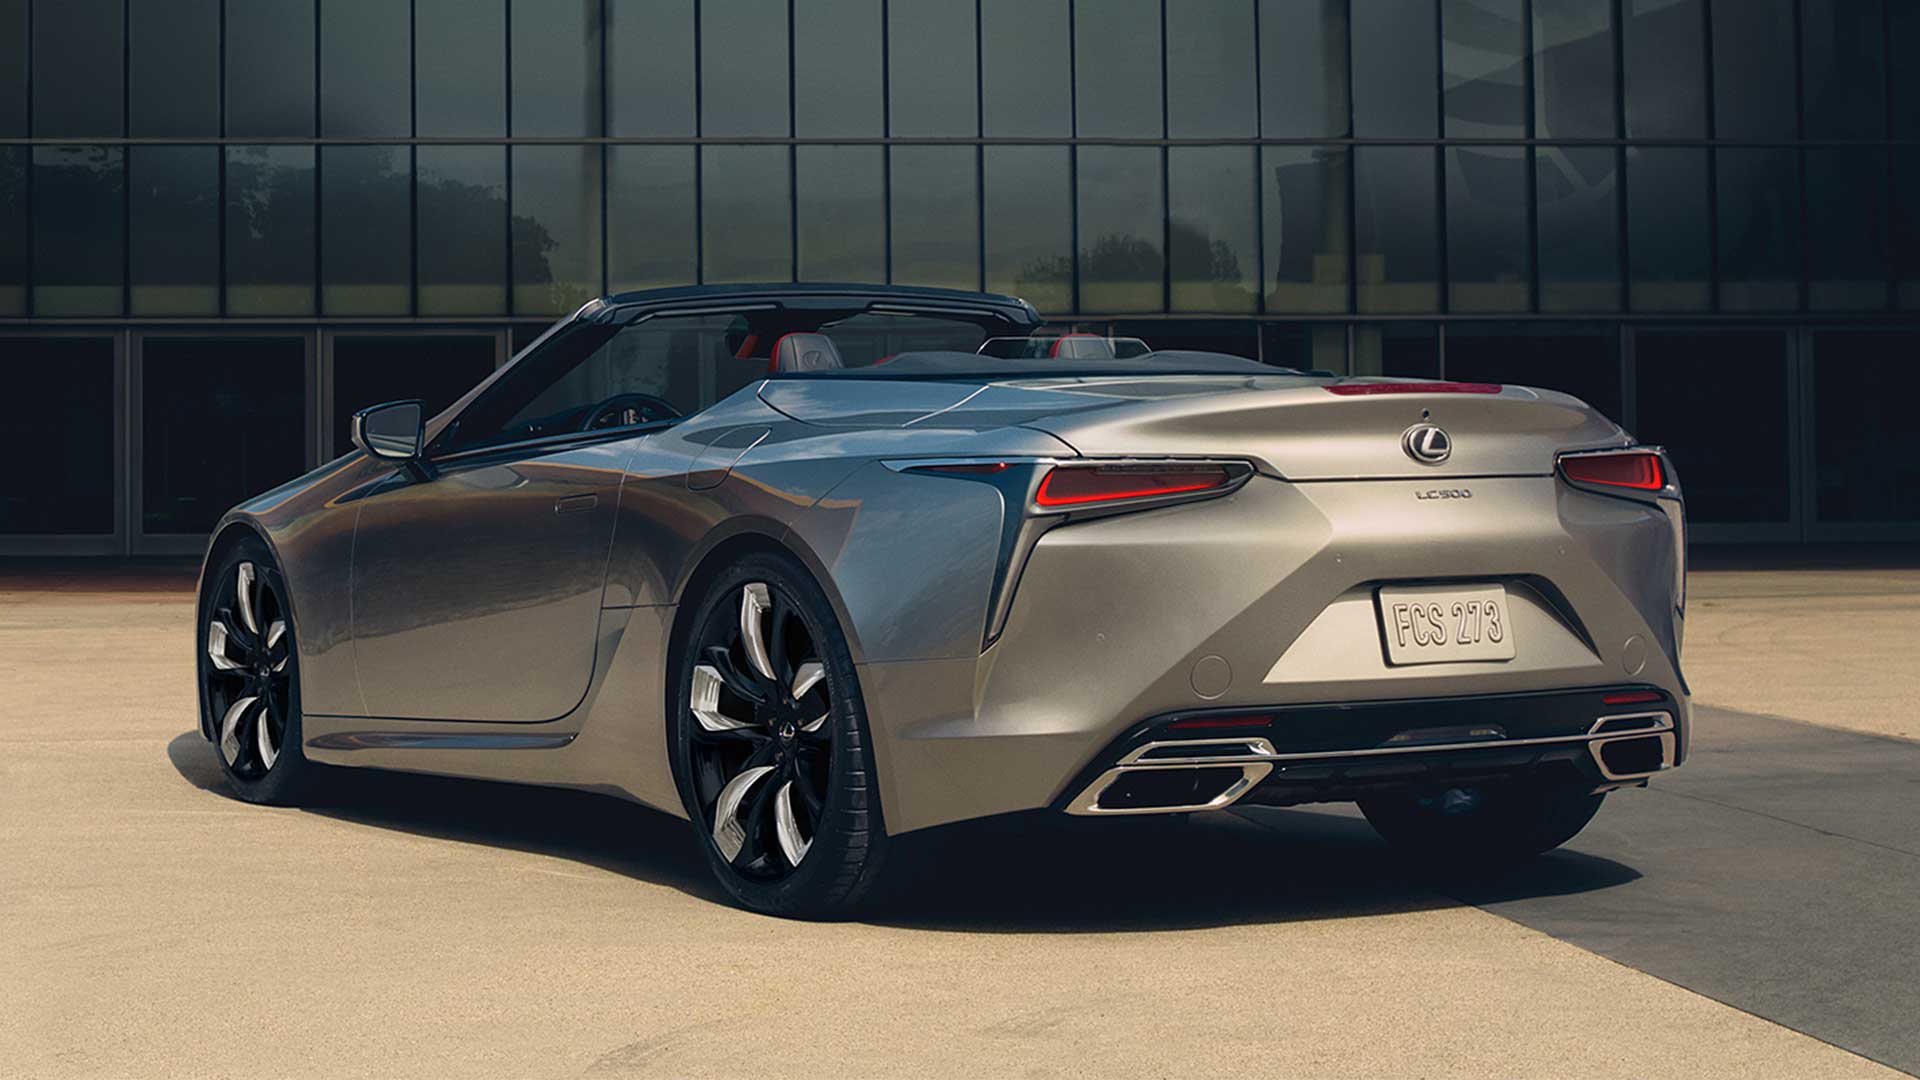 Lexus LC 500 Convertible with the roof open is shown from the rear. It is parked in front a glass walled building.